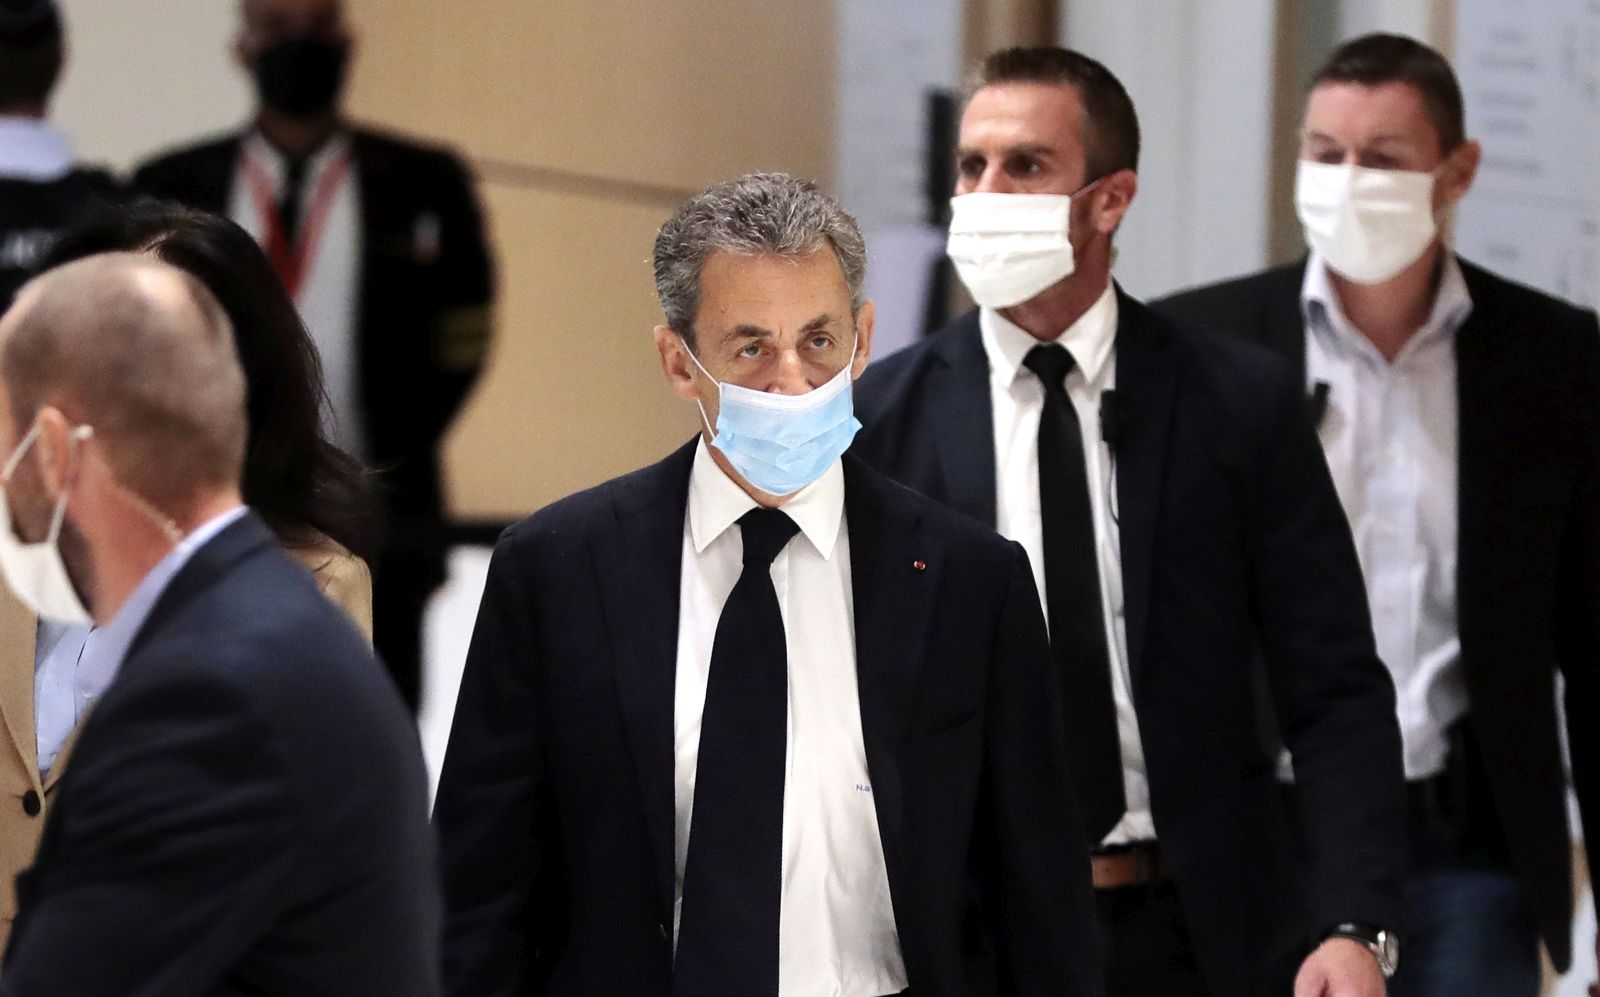 epa08837253 Former French president Nicolas Sarkozy arrives at court for his trial on corruption charges in the so-called 'wiretapping affair' in Paris, France, 23 November 2020. In 2013, Nicolas Sarkozy was using a false name, Paul Bismuth, to make phone calls to call his lawyer, Thierry Herzog, about the decision that the Court of Cassation was about to take regarding the seizure of presidential diaries in a separate case. The trial is due to run from 23 November to 10 December.
 *** Local Caption *** 55512057  EPA/JULIEN DE ROSA *** Local Caption *** 55512057